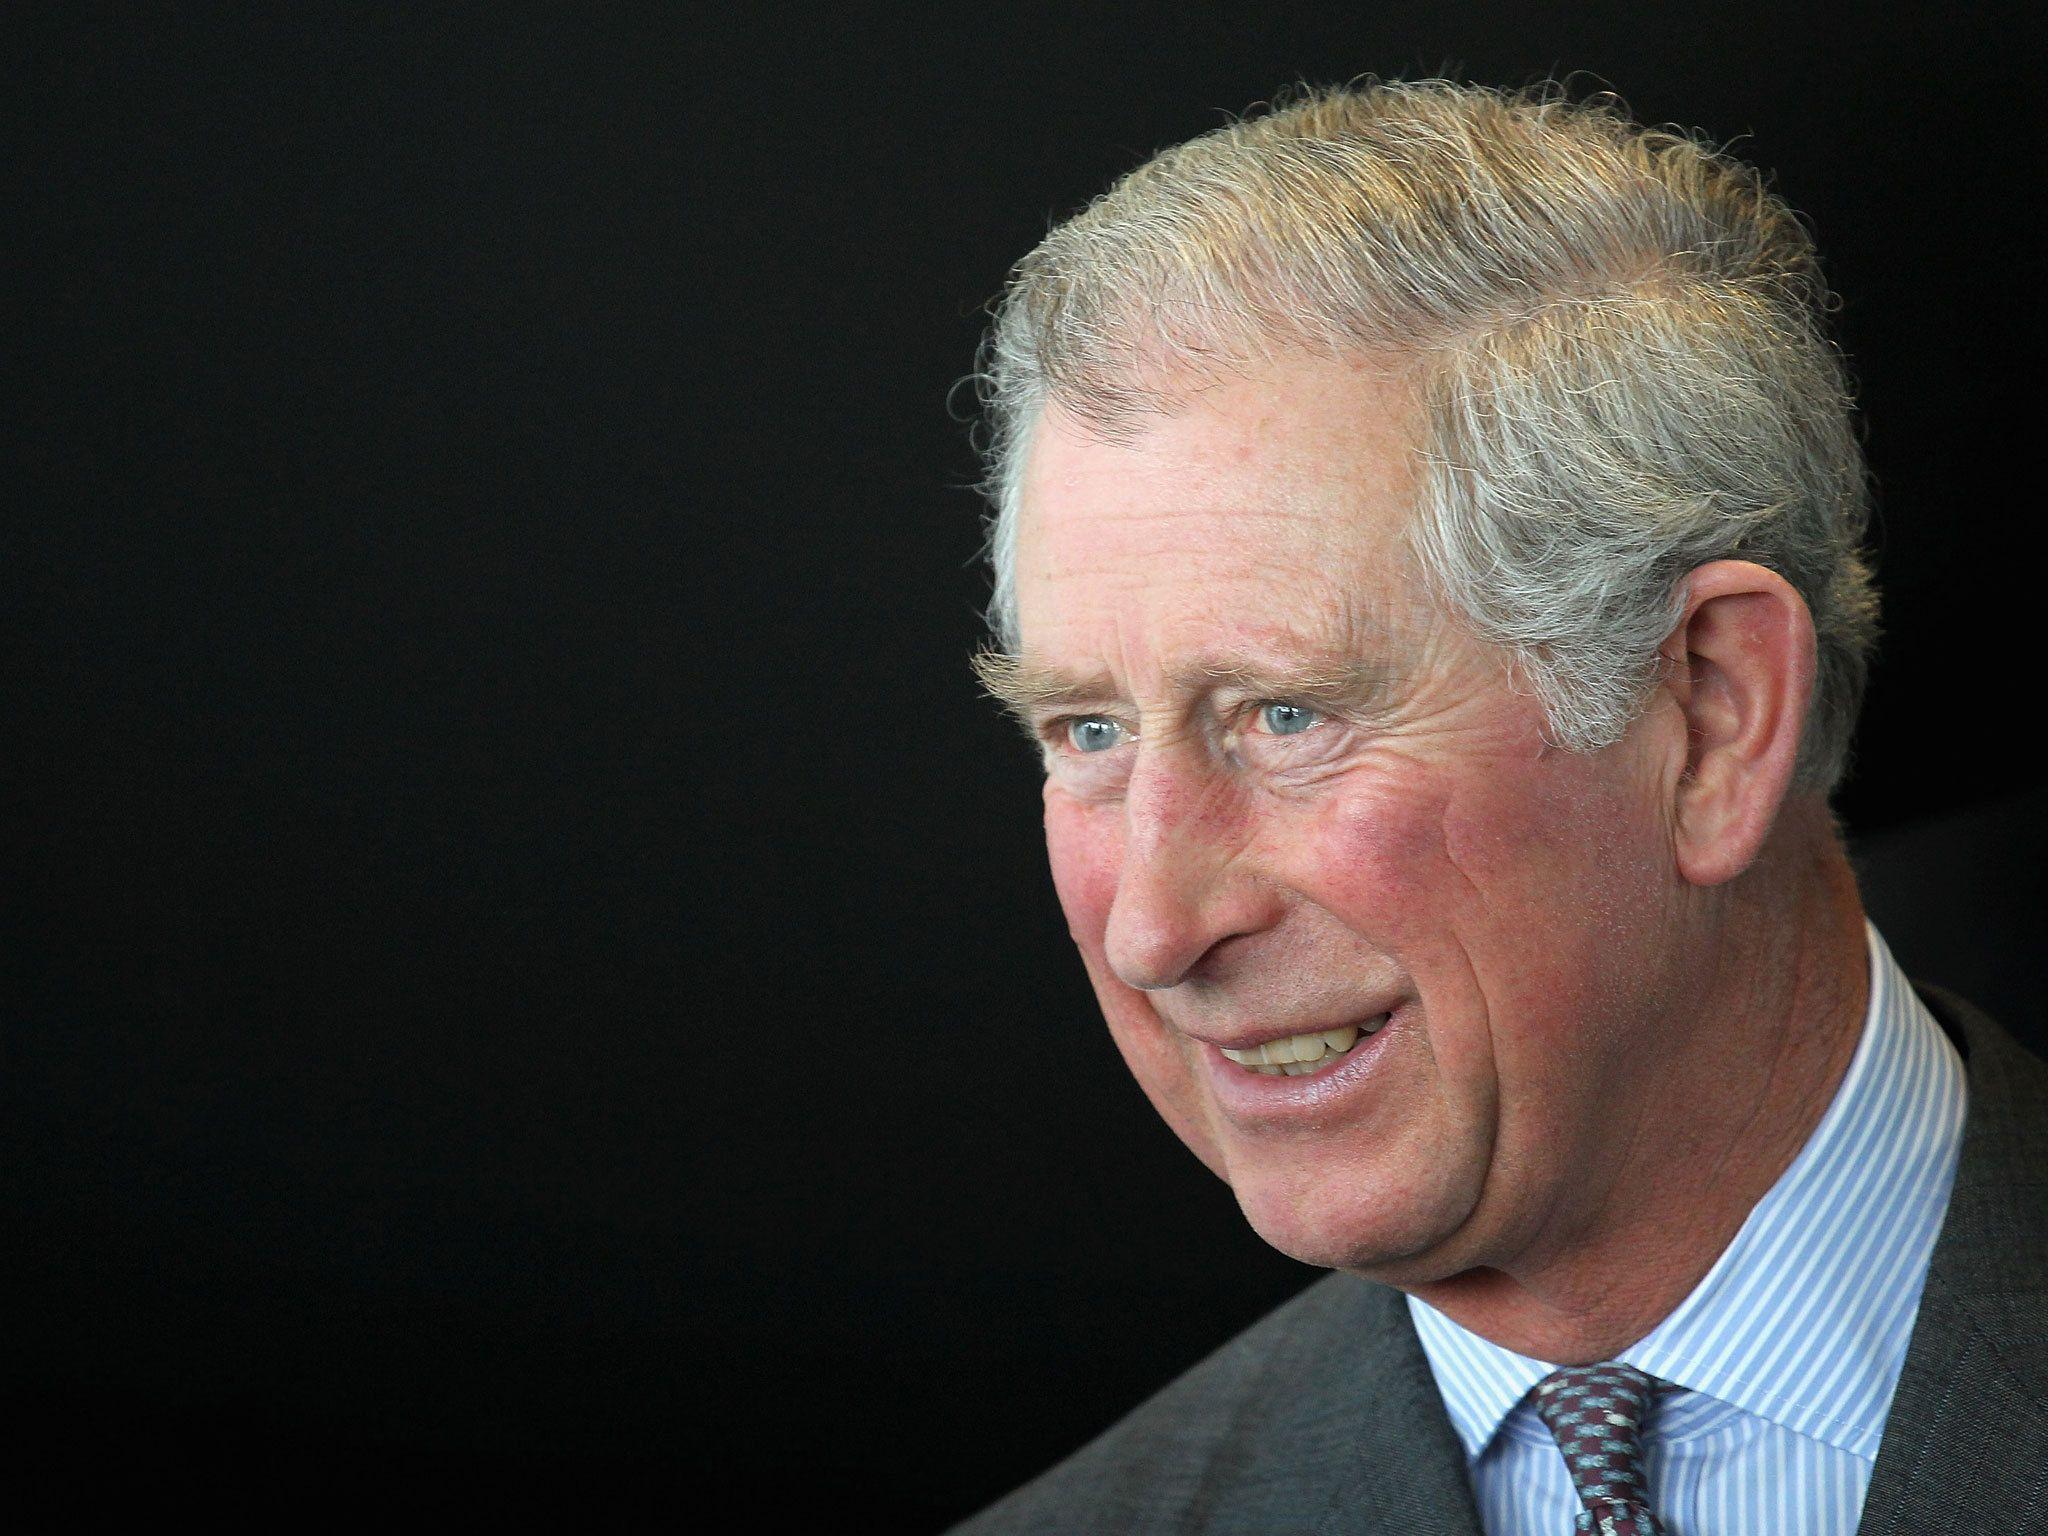 Prince Charles Wallpaper Image Photo Picture Background